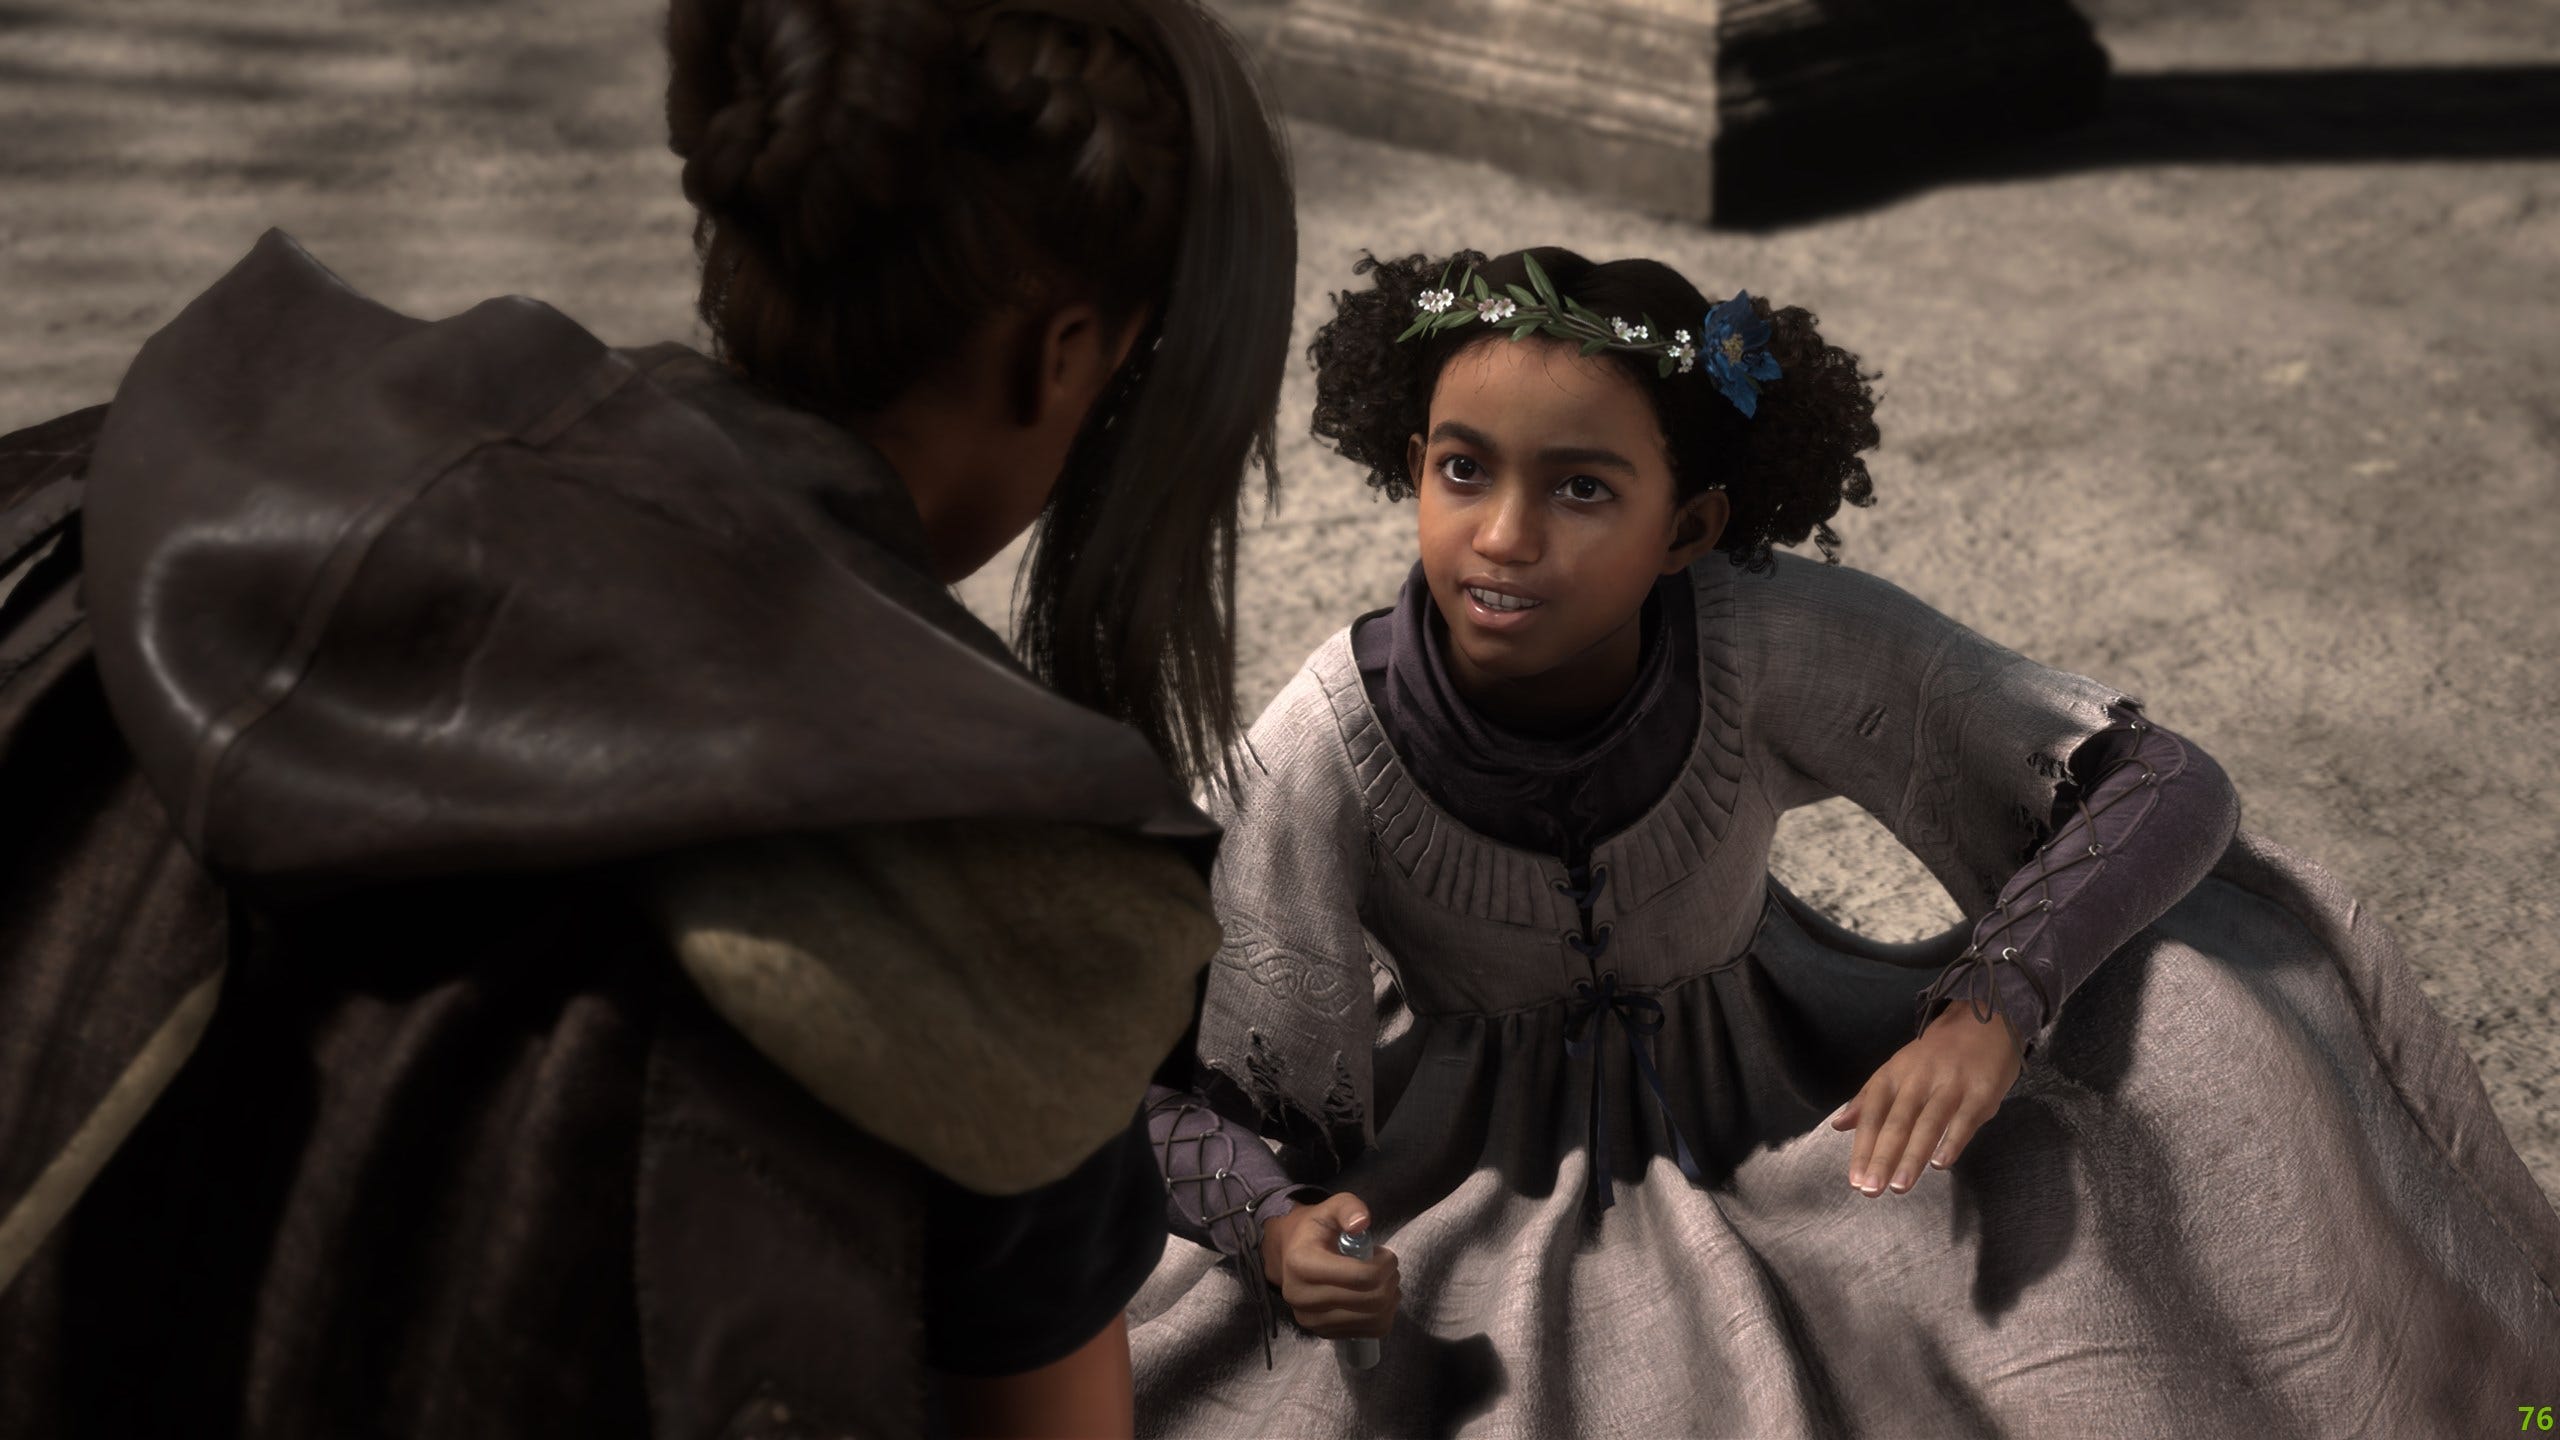 Forspoken's Fray Holland speaks to a small black girl